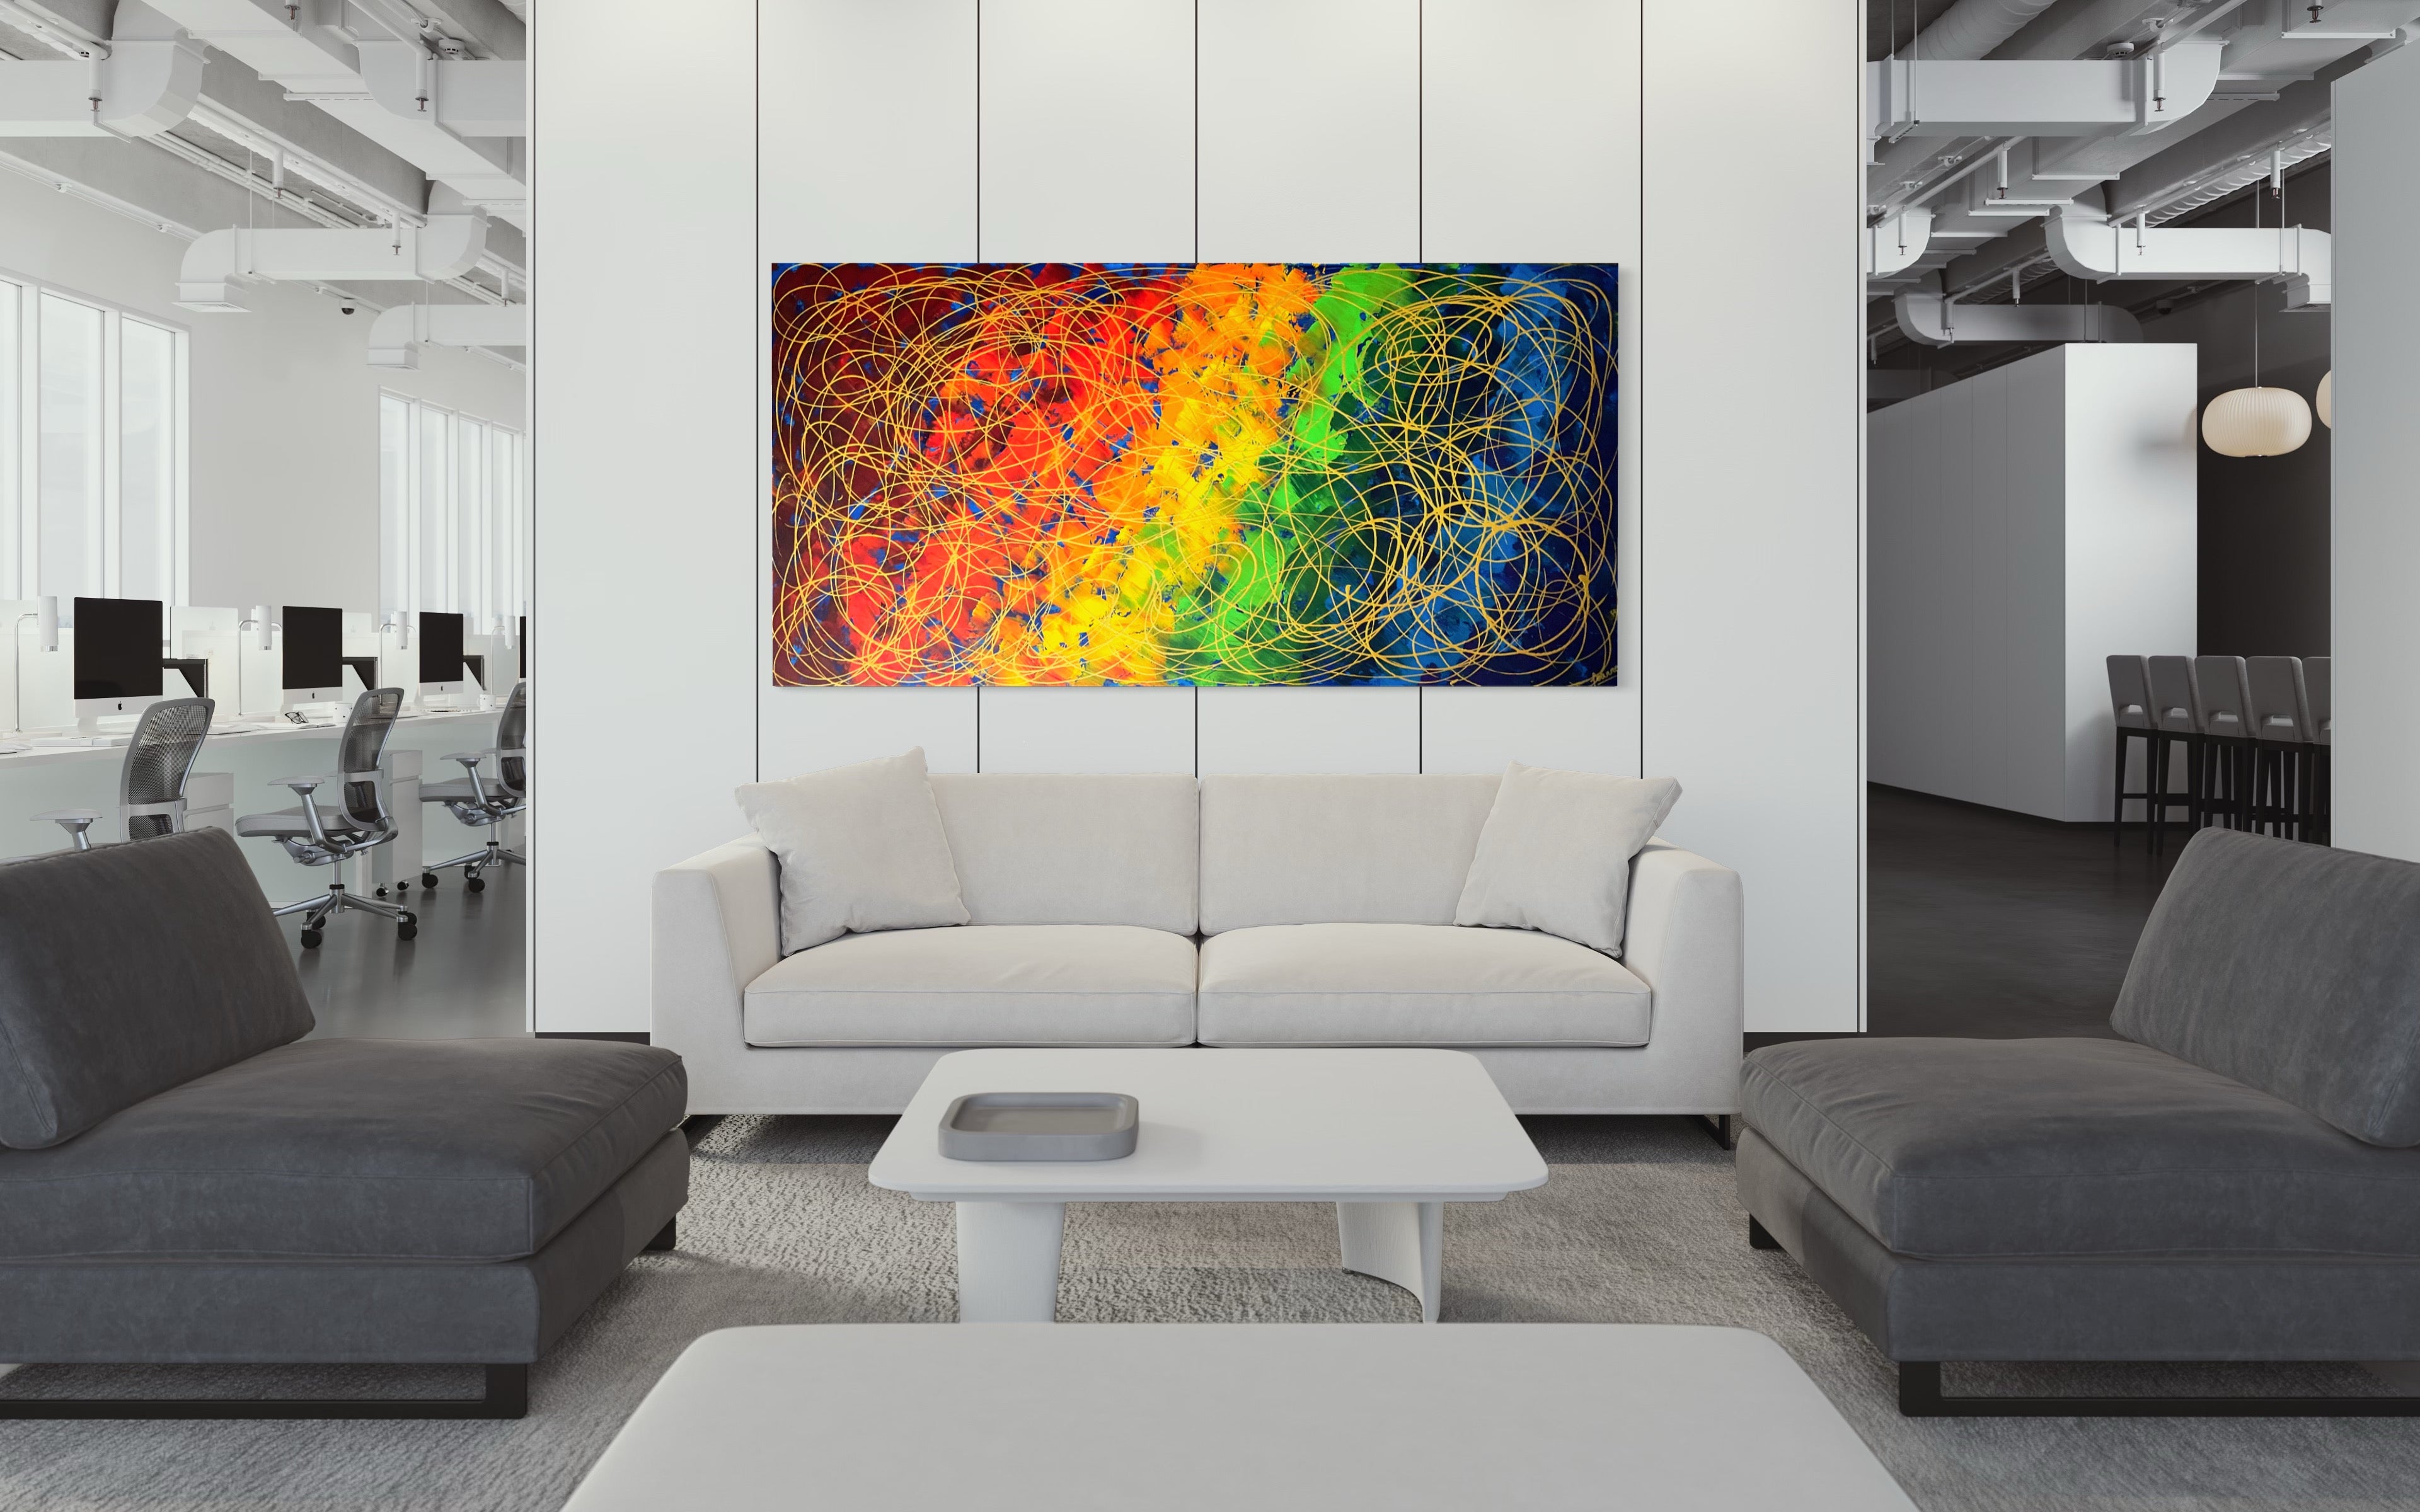 The Promise Collection- The Promise No. 2 (91 cm x 182 cm)Textured Abstract Painting